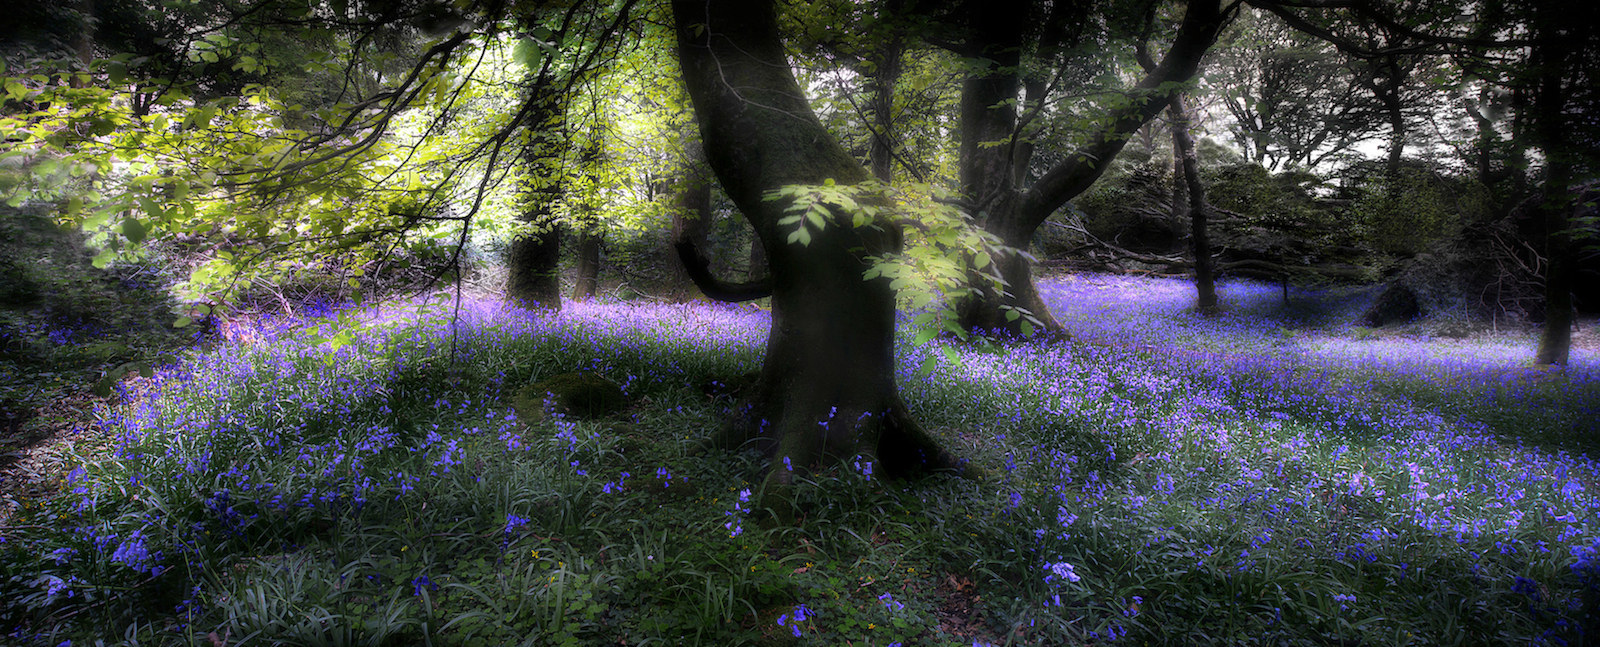 Third place, Seasons – "Bluebell Wood" by David Shandley